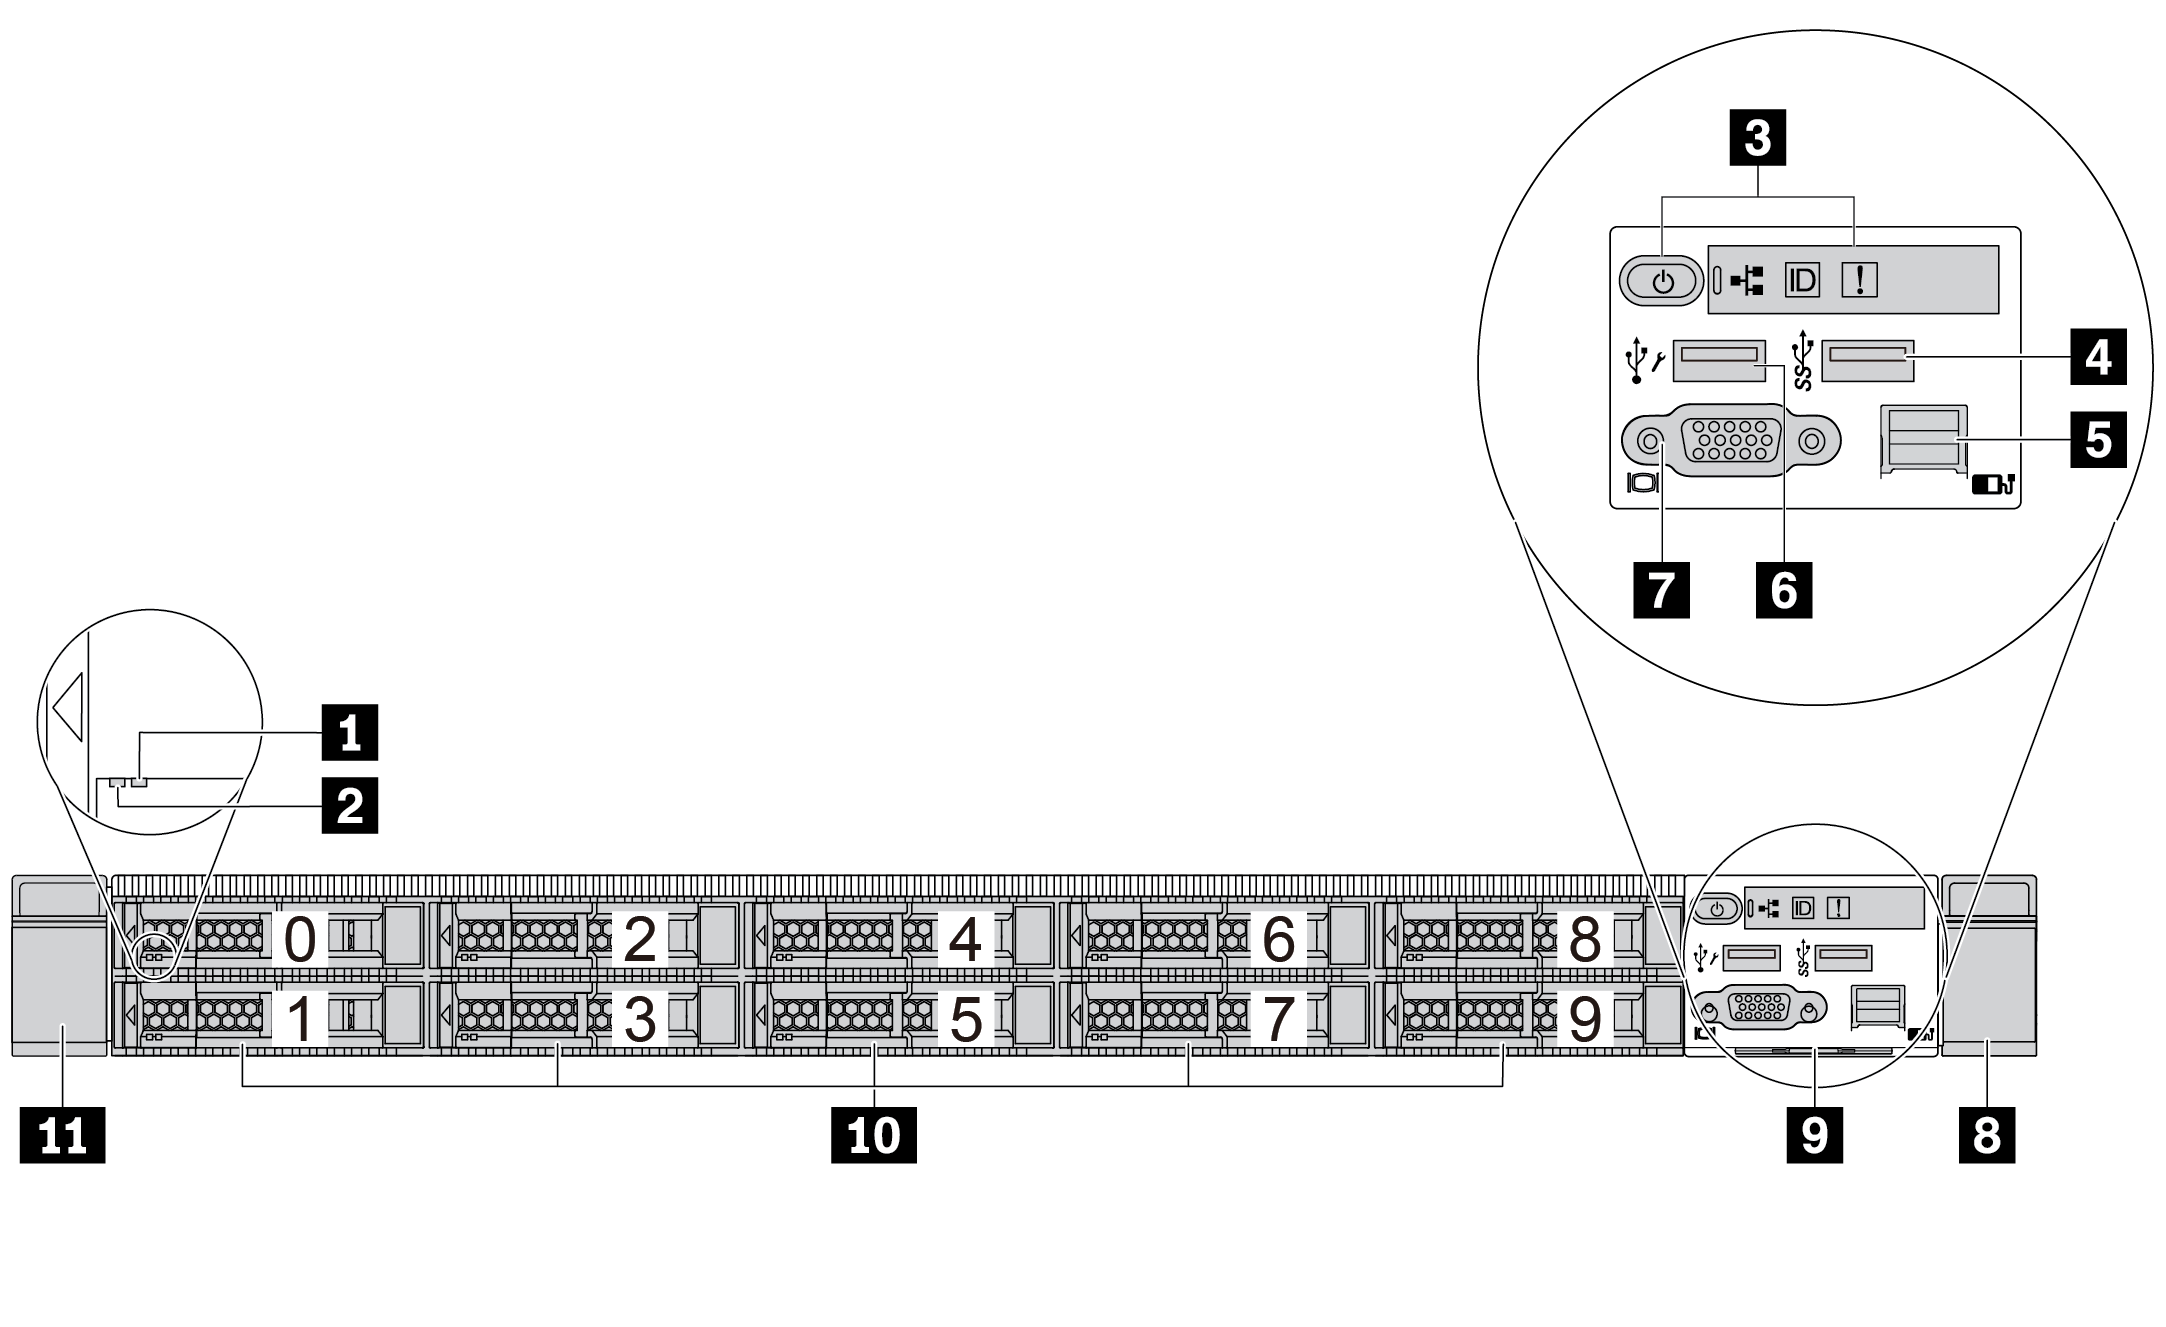 Front view of server model with ten 2.5-inch drive bays